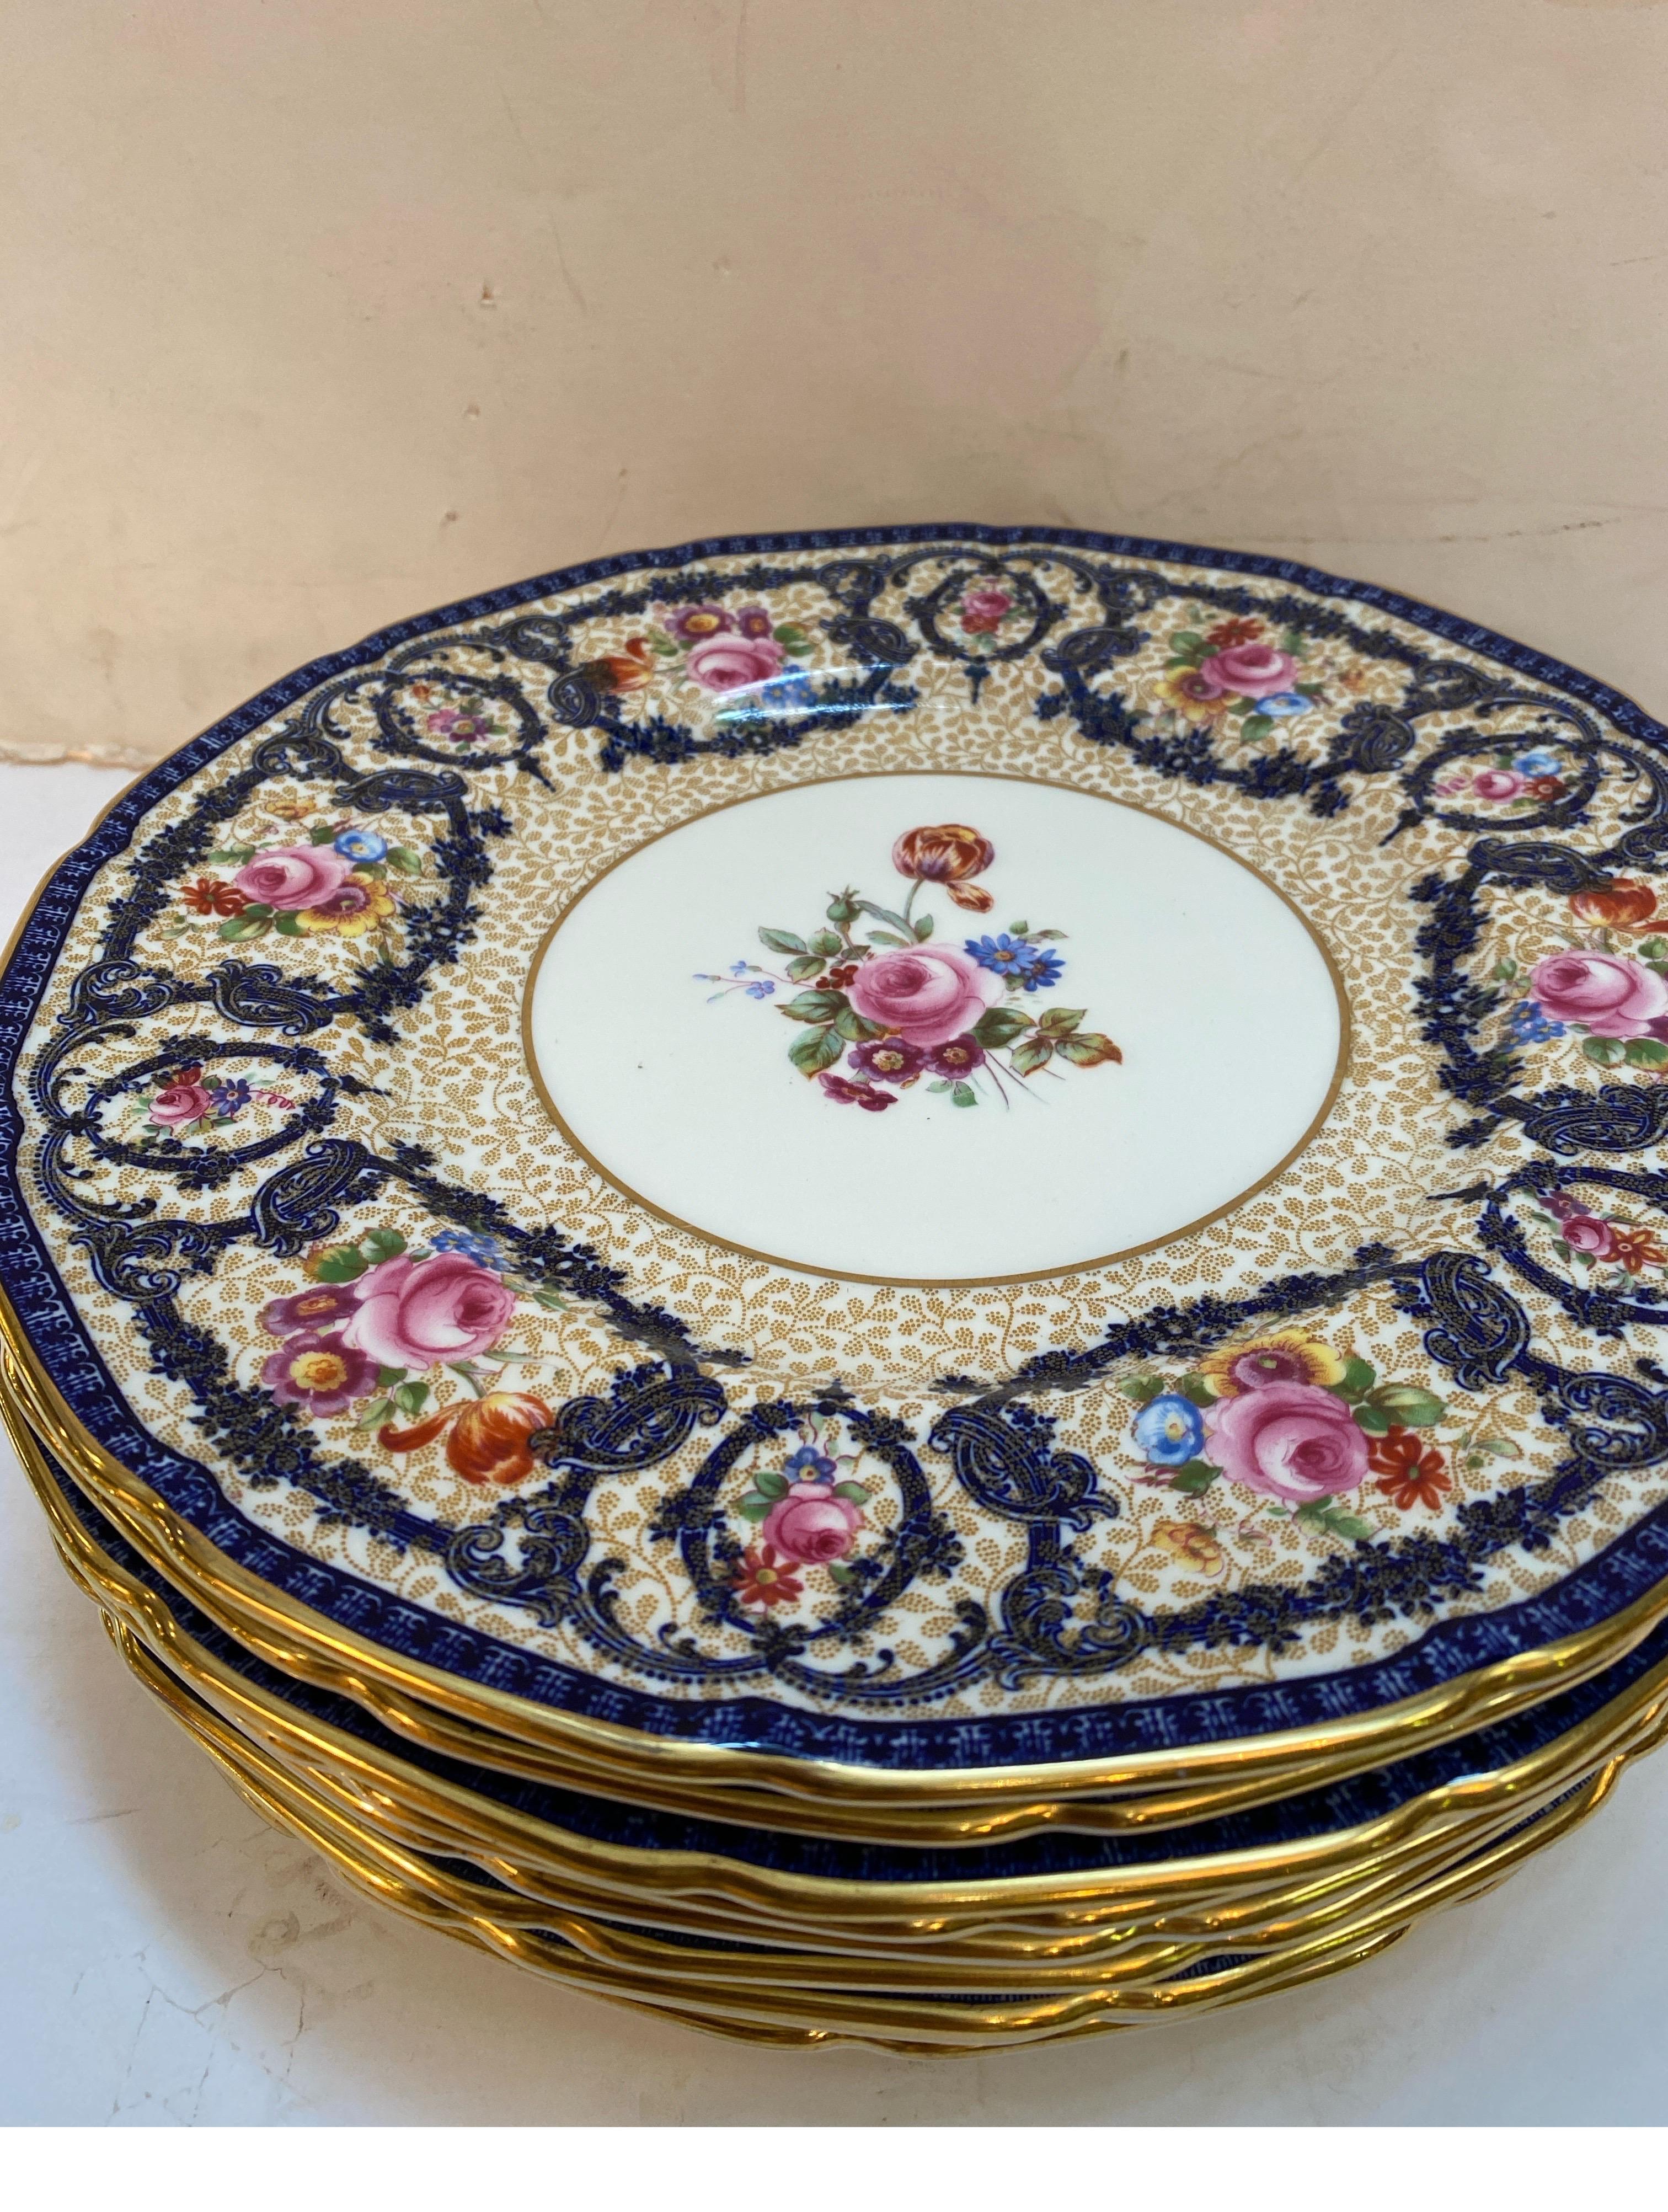 Hand-Painted A Set of 10 Hand Painted Antique Service Plates by Royal Doulton Circa 1915 For Sale